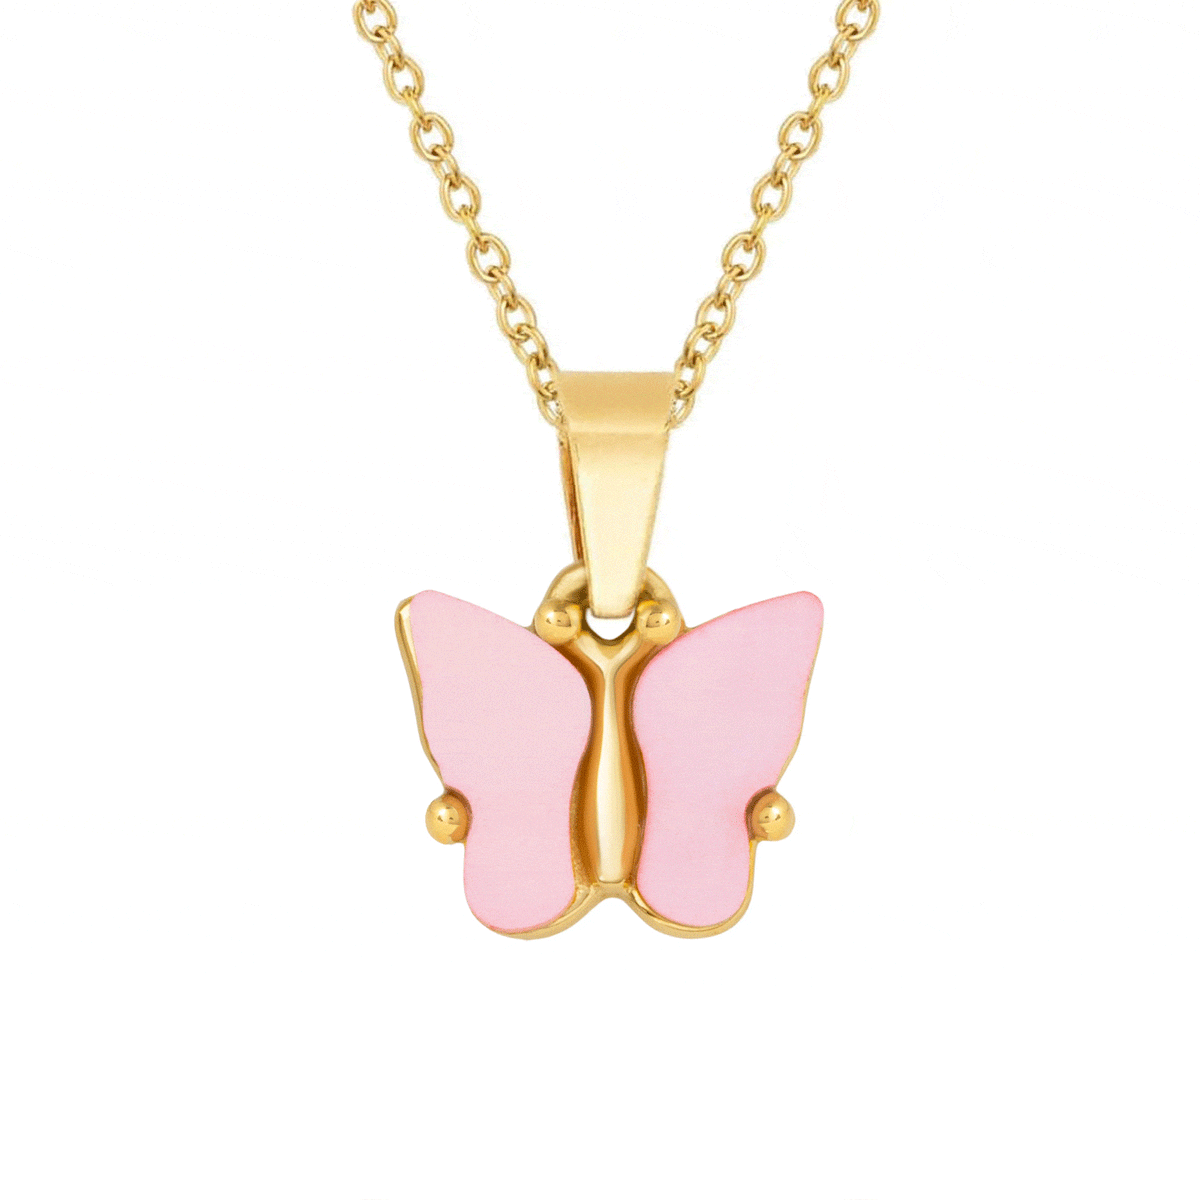 BohoMoon Stainless Steel Royale Butterfly Necklace